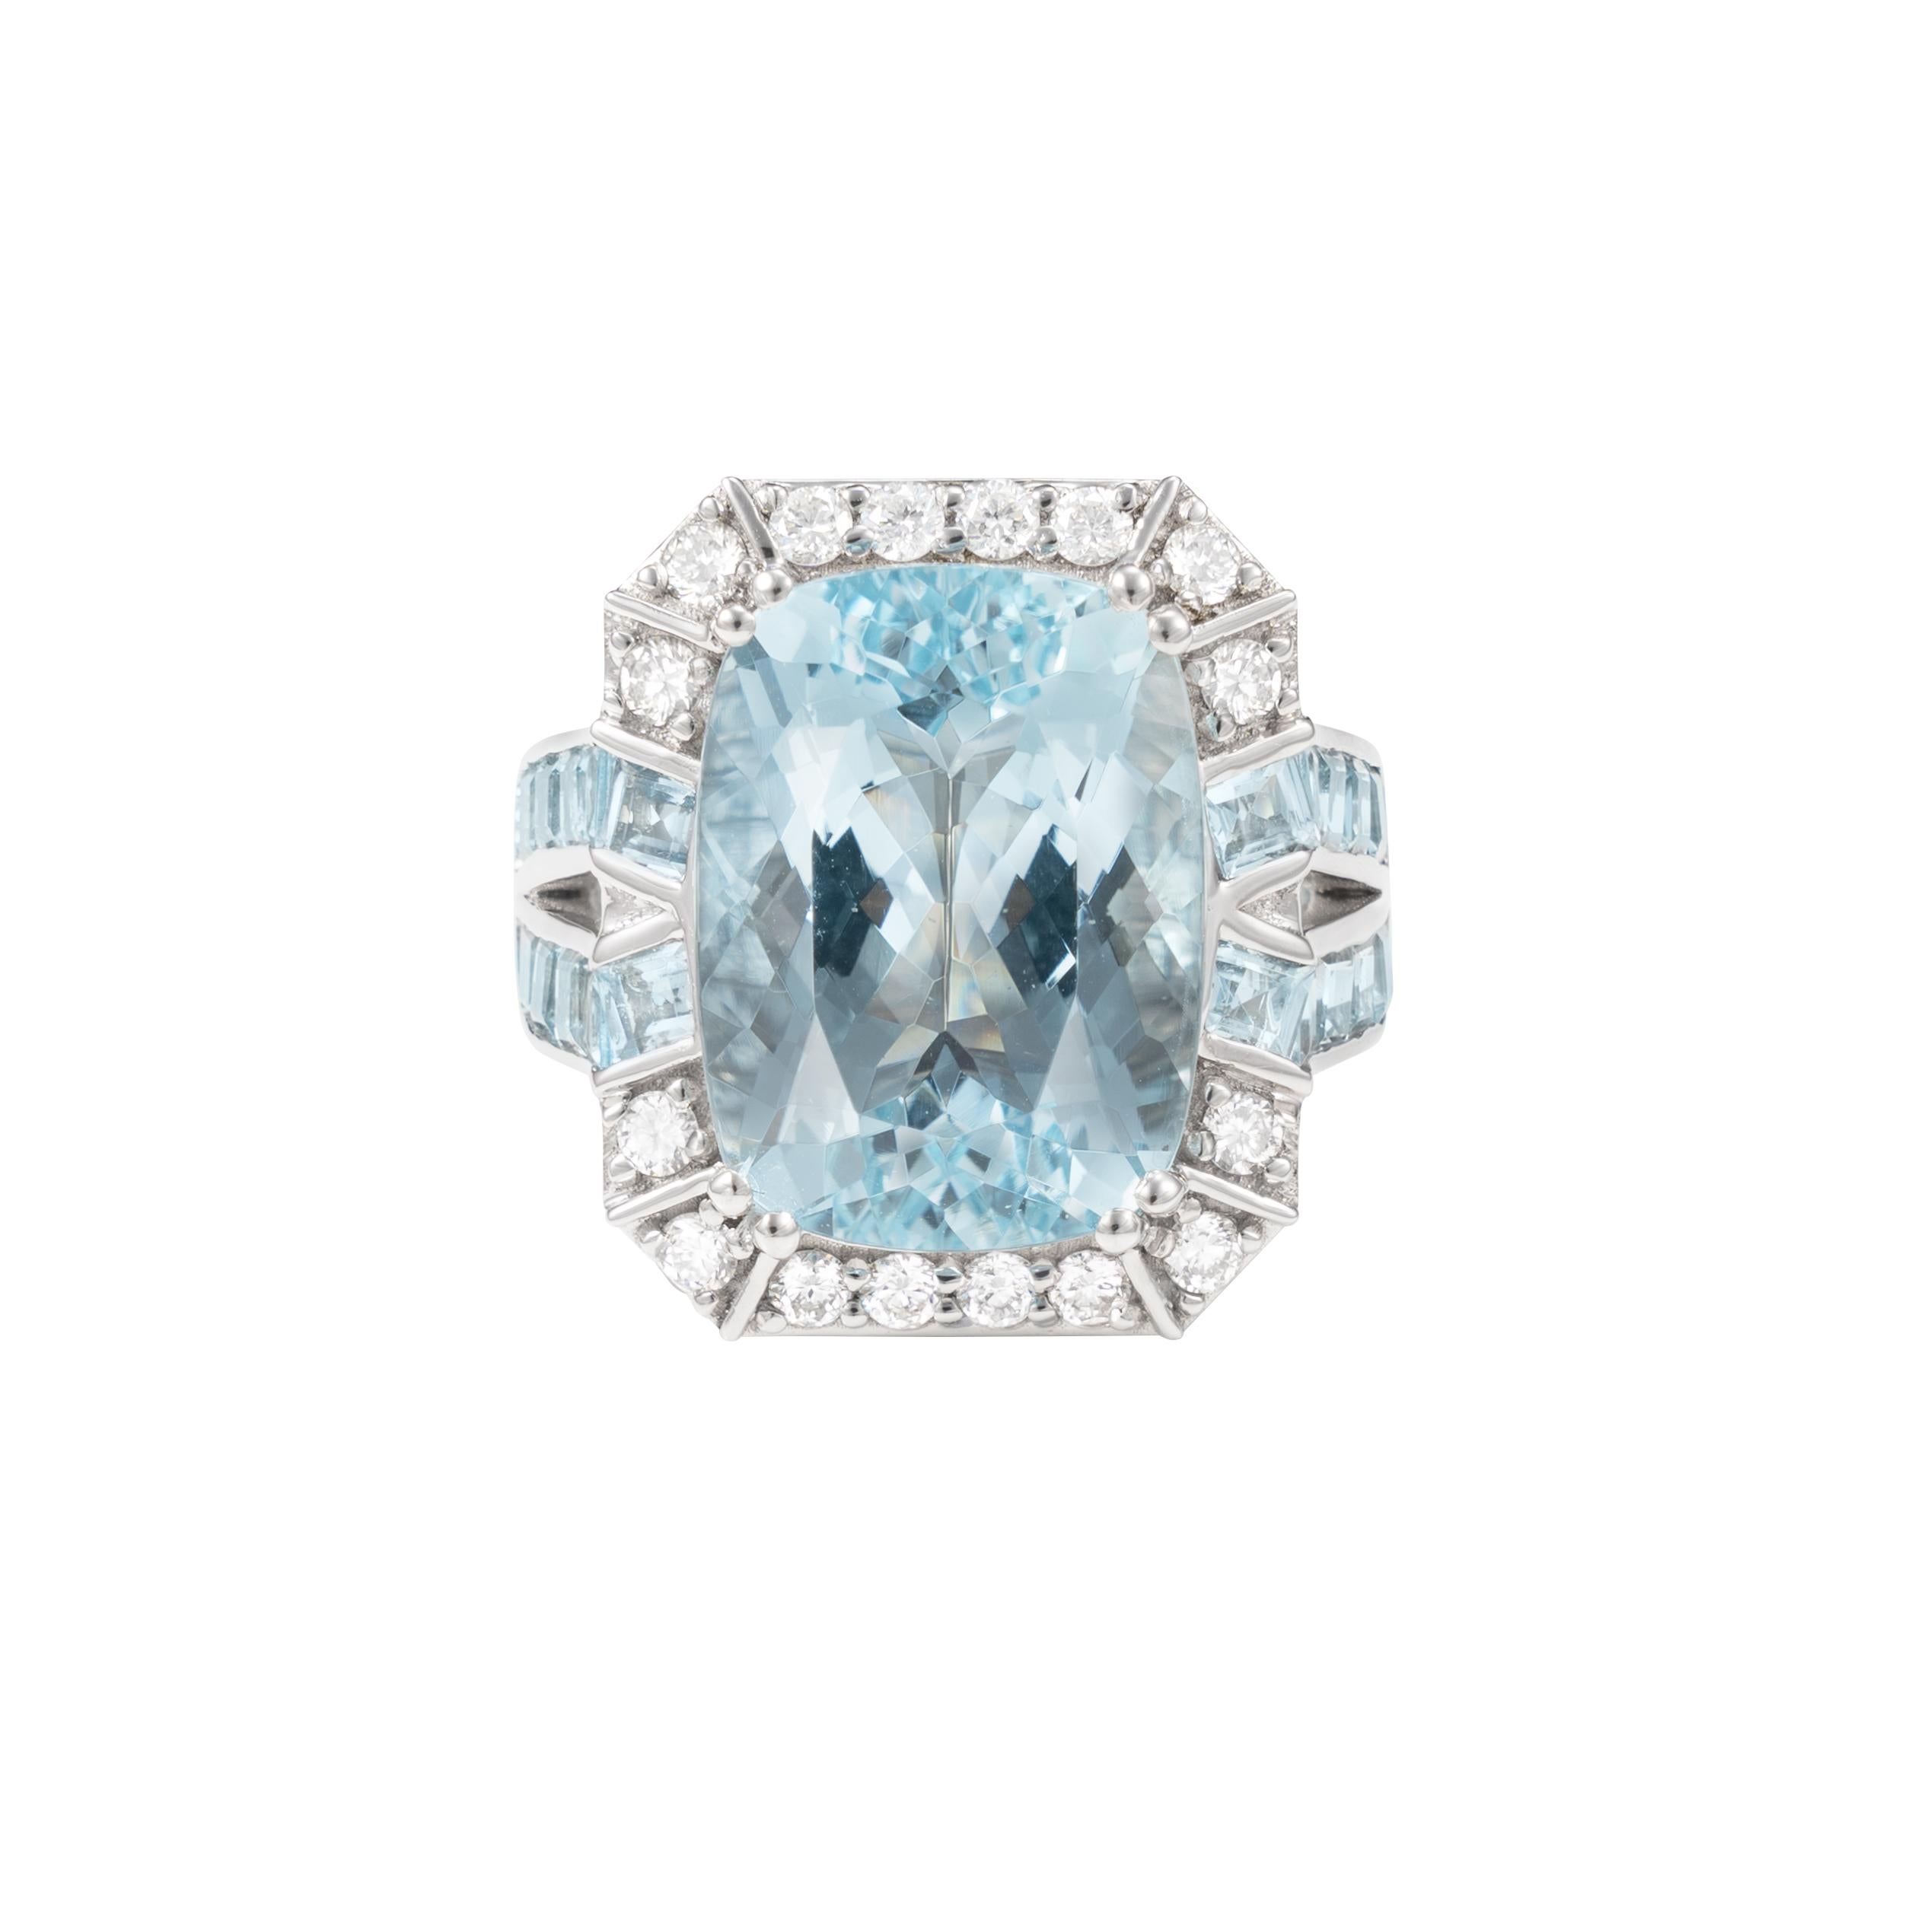 Contemporary Aquamarine and White Diamond Ring in 18 Karat White Gold. For Sale